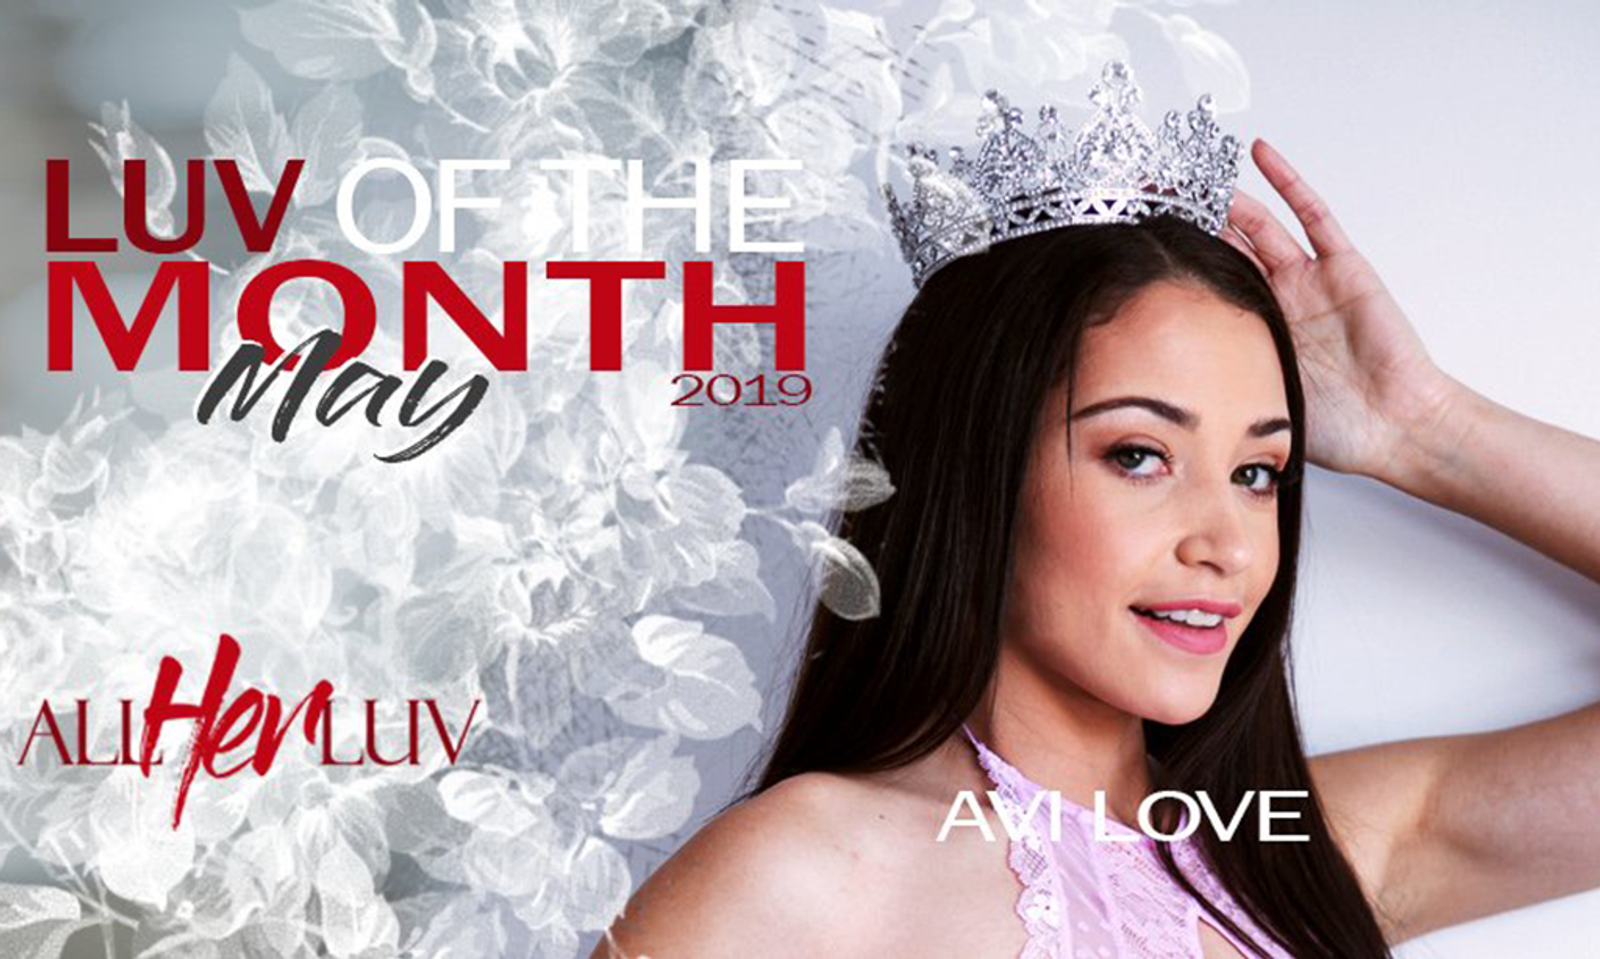 Avi Love Is AllHerLuv.com's May 2019 Luv of the Month